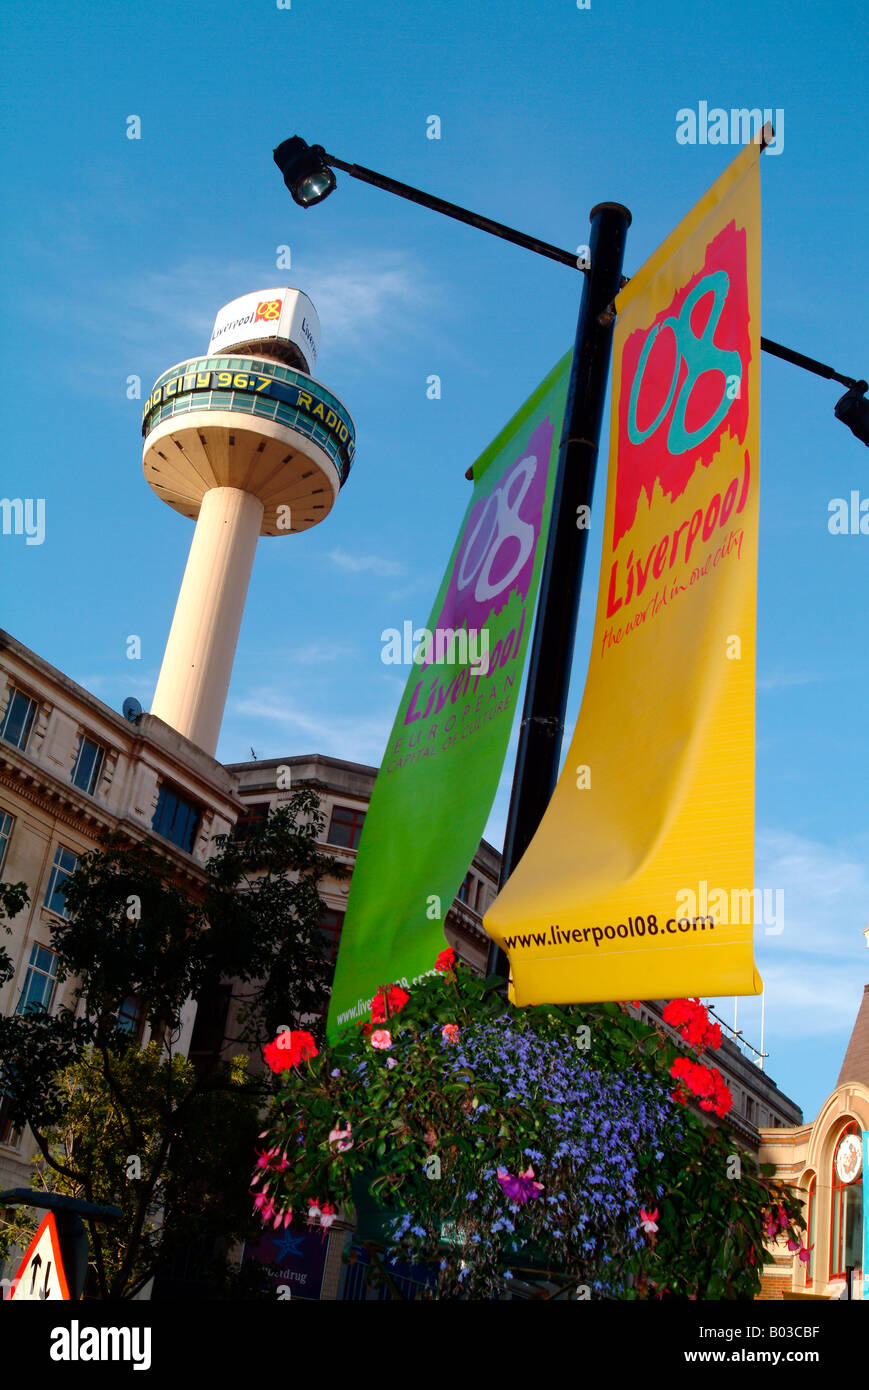 Liverpool capital of culture 08 banner Stock Photo